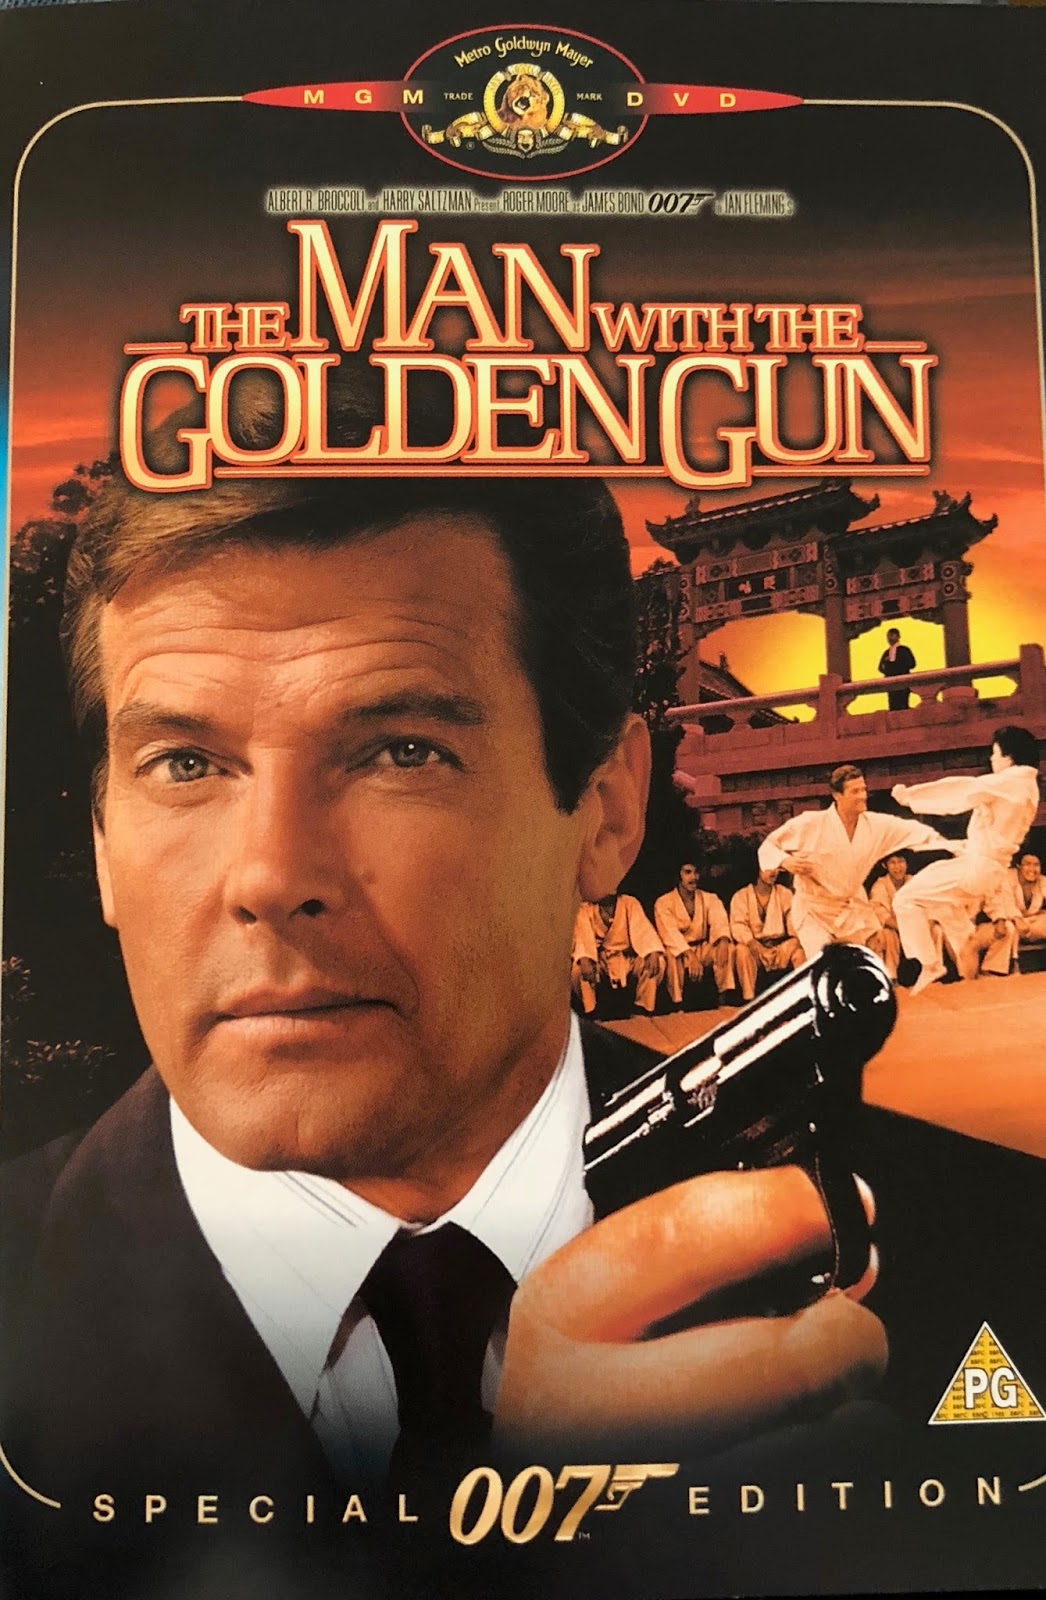 Project Bond: The Man with the Golden Gun | Big Stevie Cool